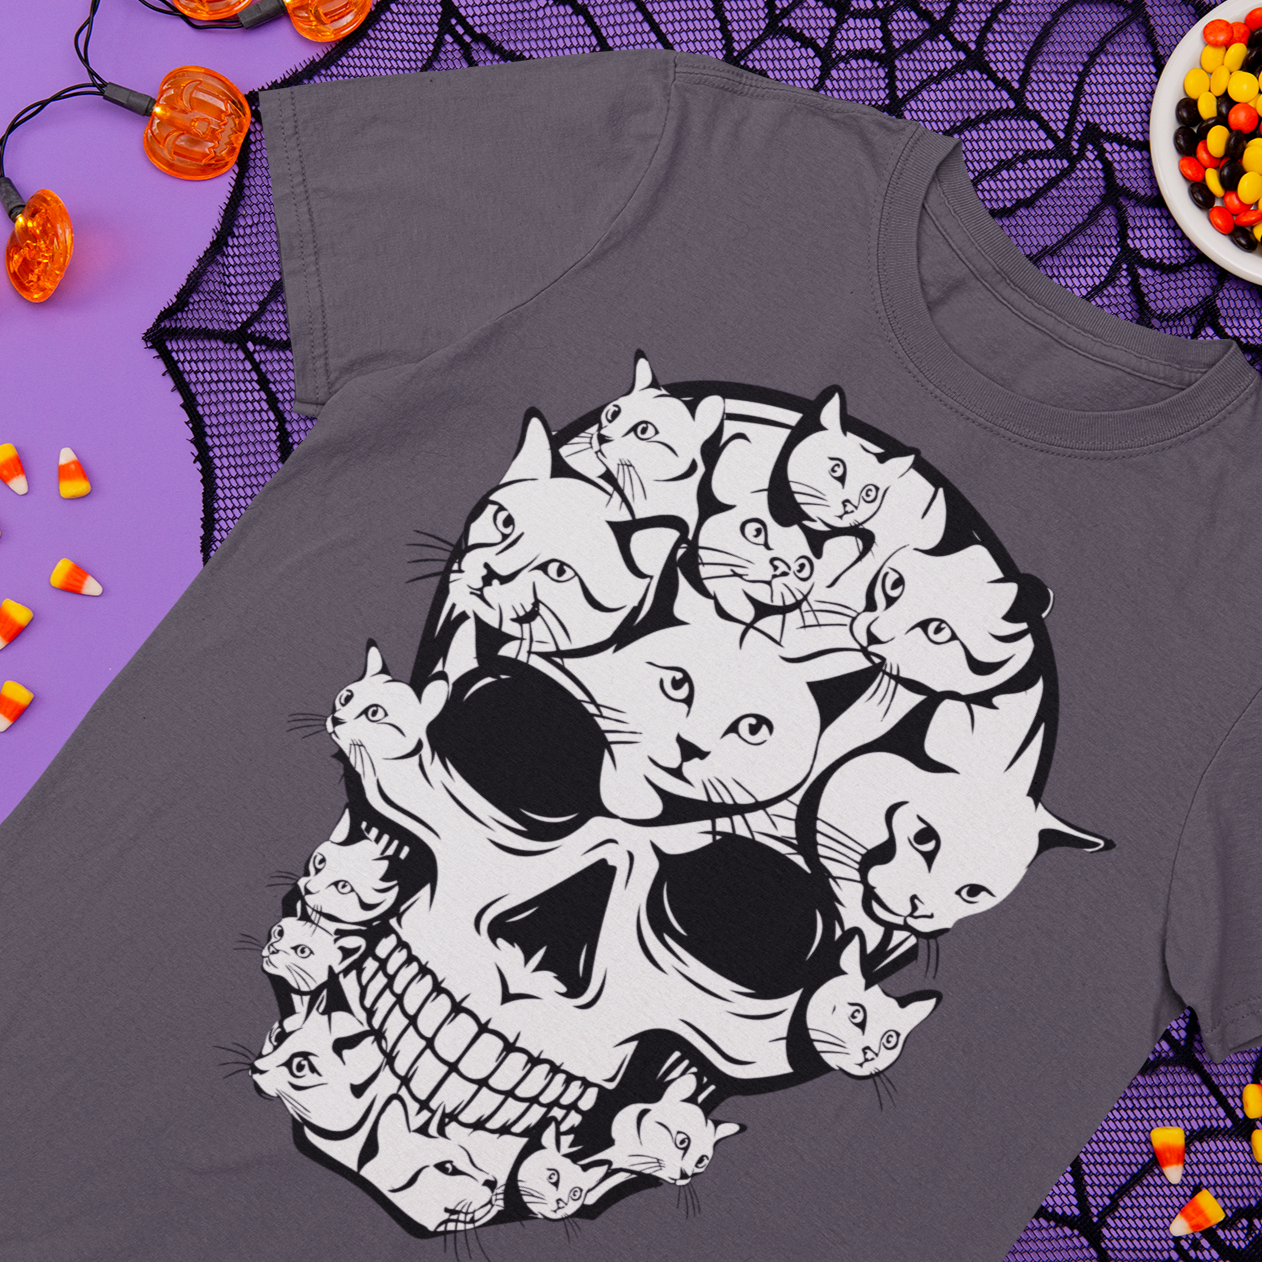 Halloween Funny Cat Skull Youth Tee - Sport Finesse